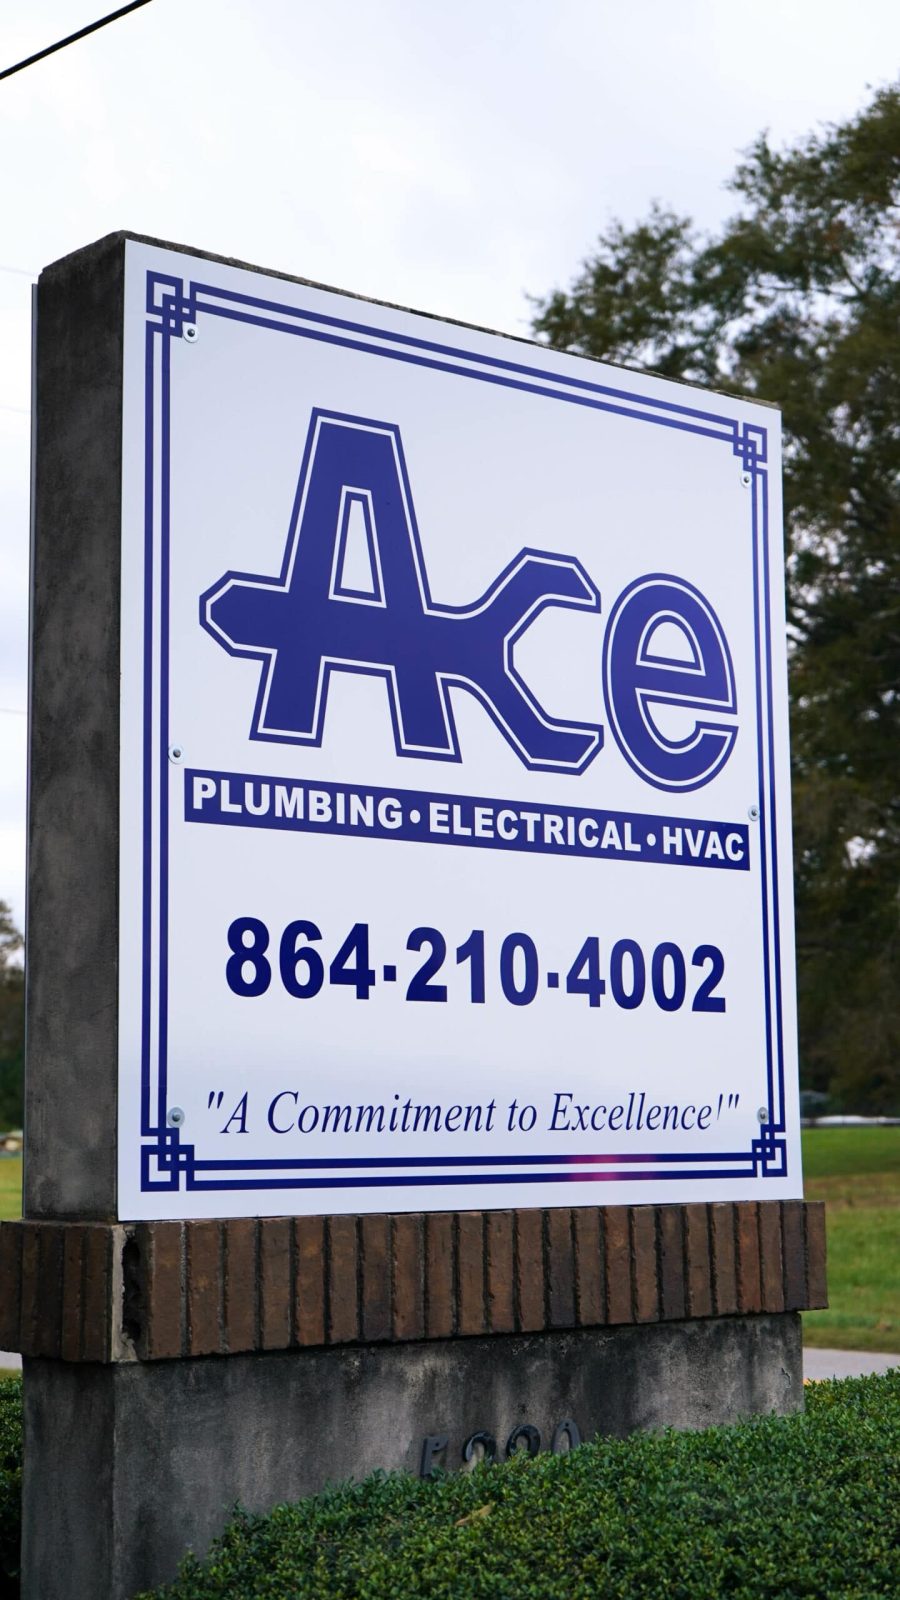 Home Plumbing Service in Greenville, SC